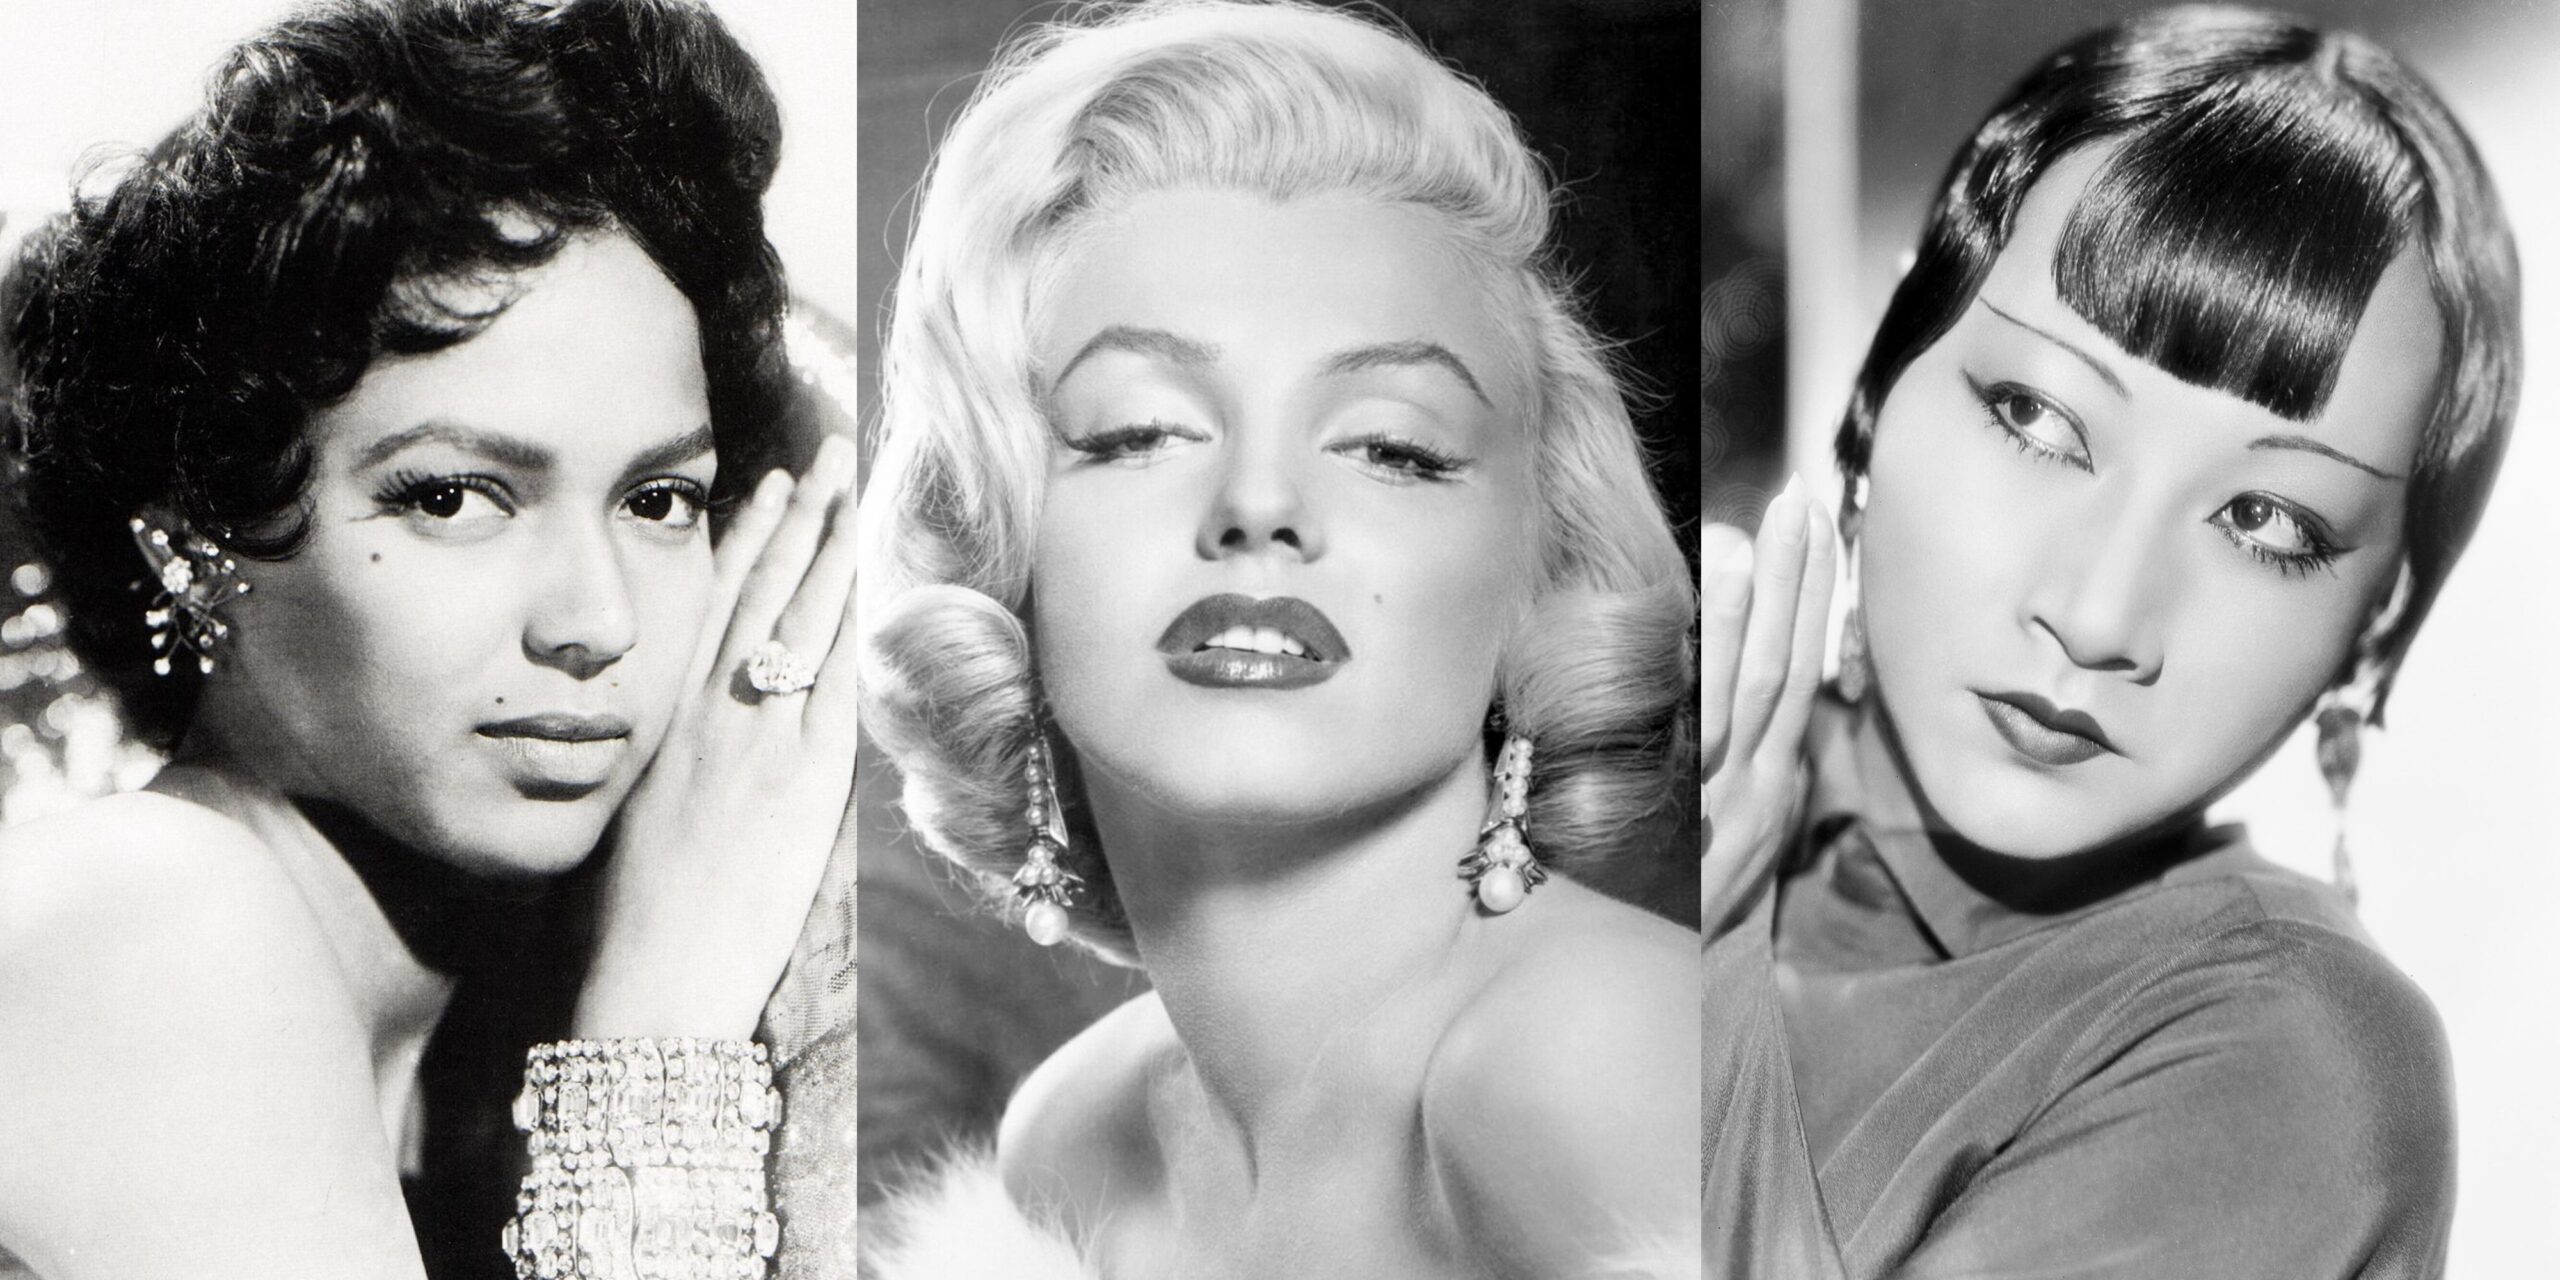 Top 3 Beauty Tips to Look Like a Movie Star